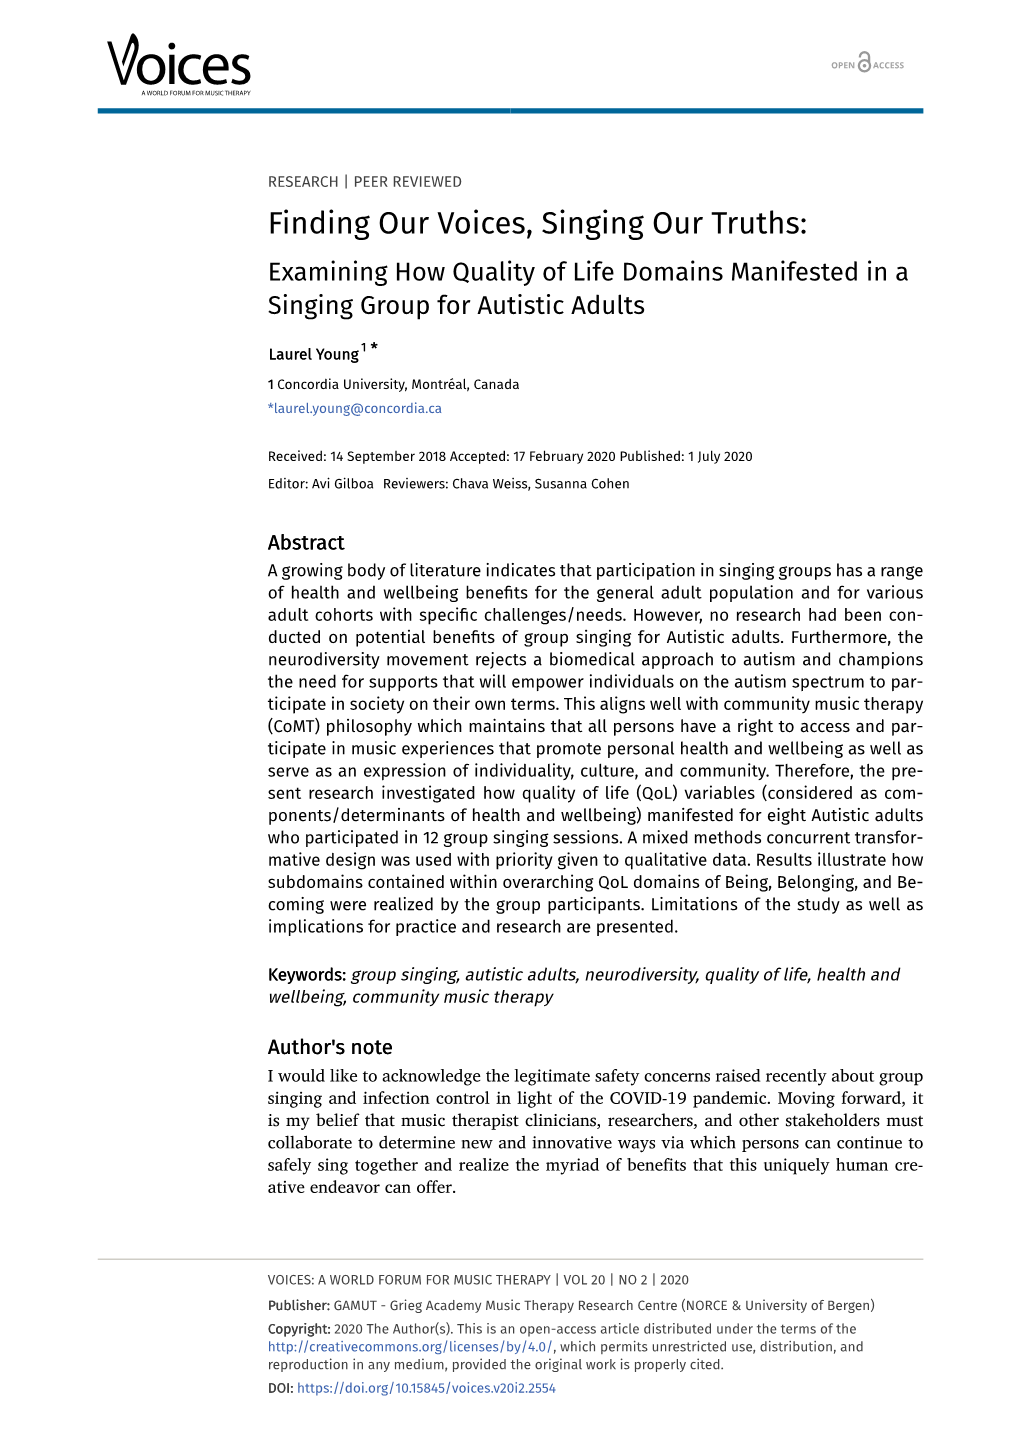 Finding Our Voices, Singing Our Truths: Examining How Quality of Life Domains Manifested in a Singing Group for Autistic Adults